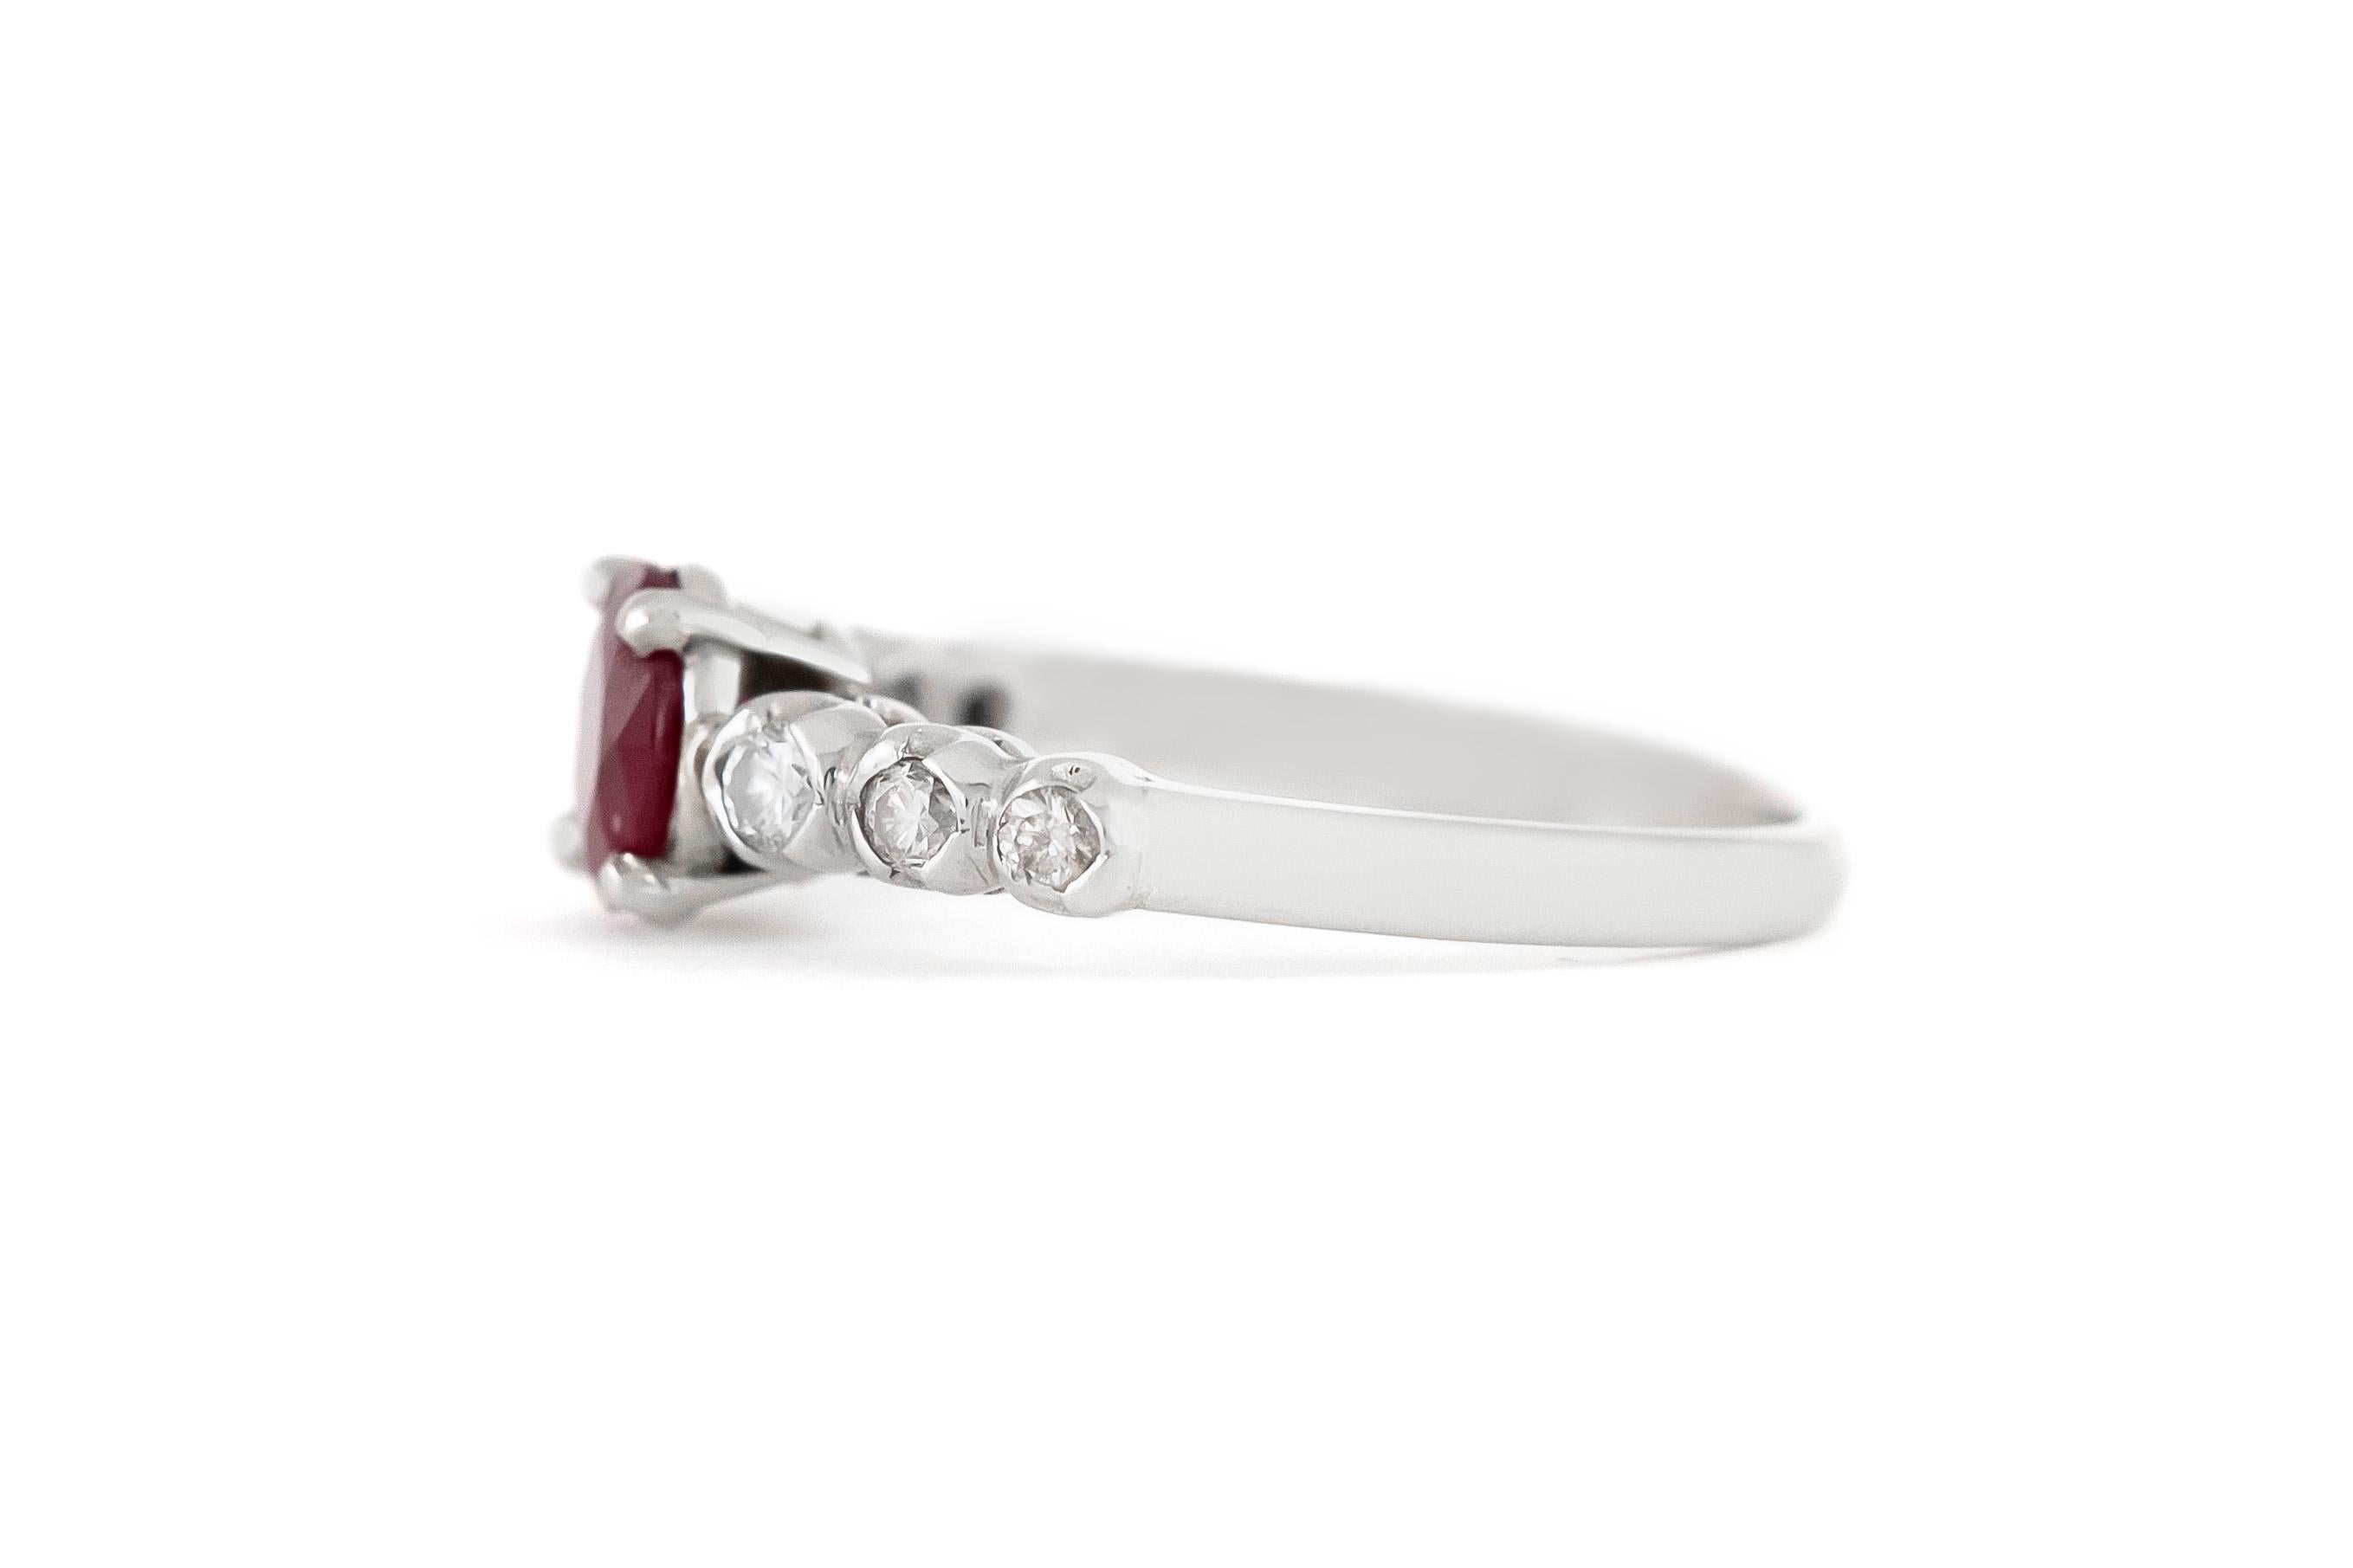 The ring is finely crafted in platinum with ruby center stone weighing approximately total of 0.70 carat and diamonds weighing 0.30 carat 
Circa 1980.